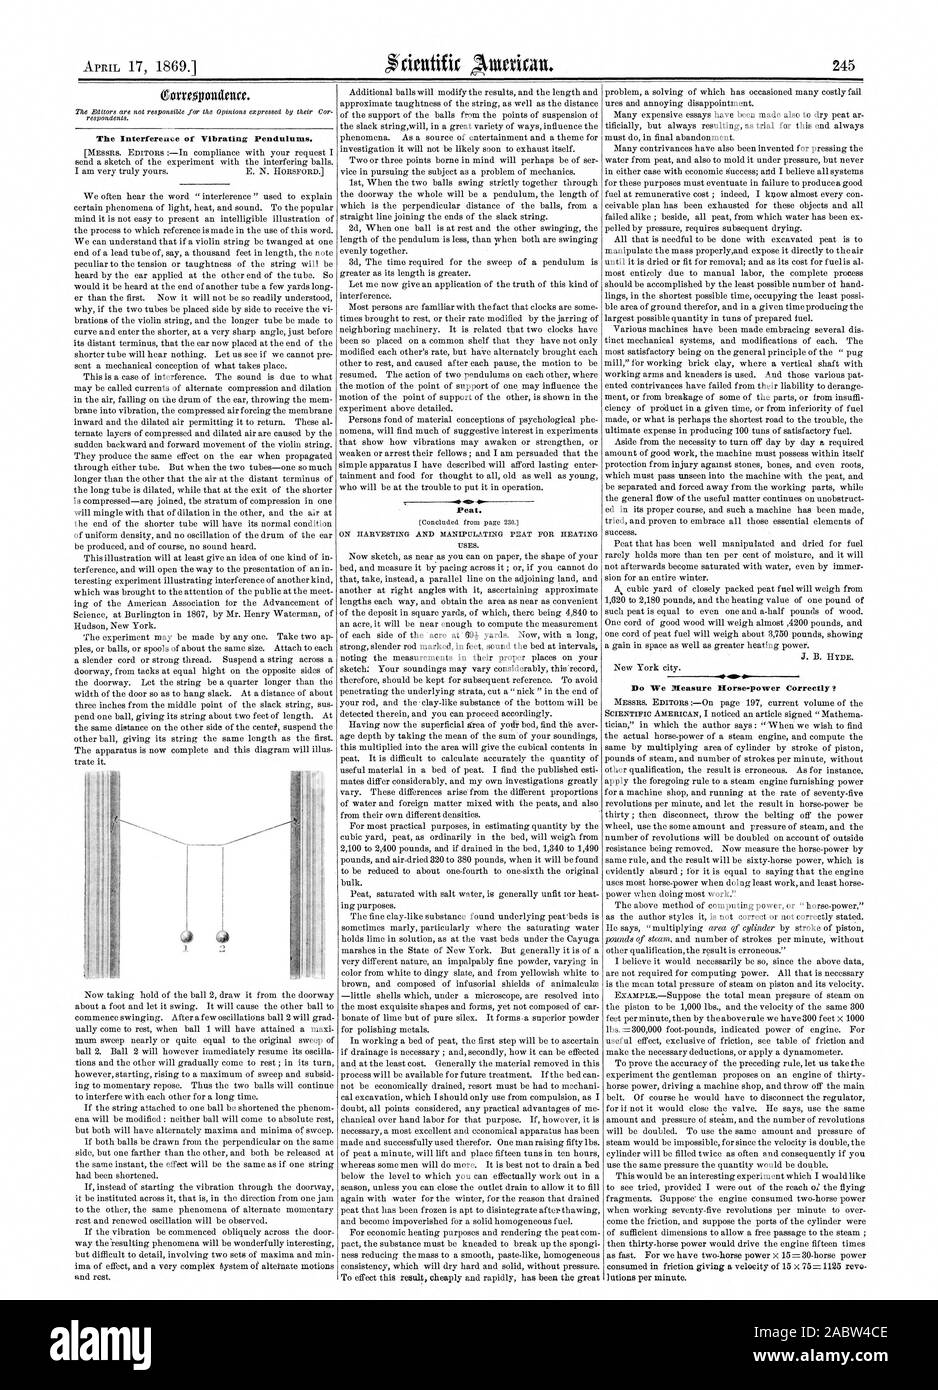 The Interference of Vibrating Pendulums. 10. 40. Peat. Do We Measure Horse-power Correctly, scientific american, 1869-04-17 Stock Photo